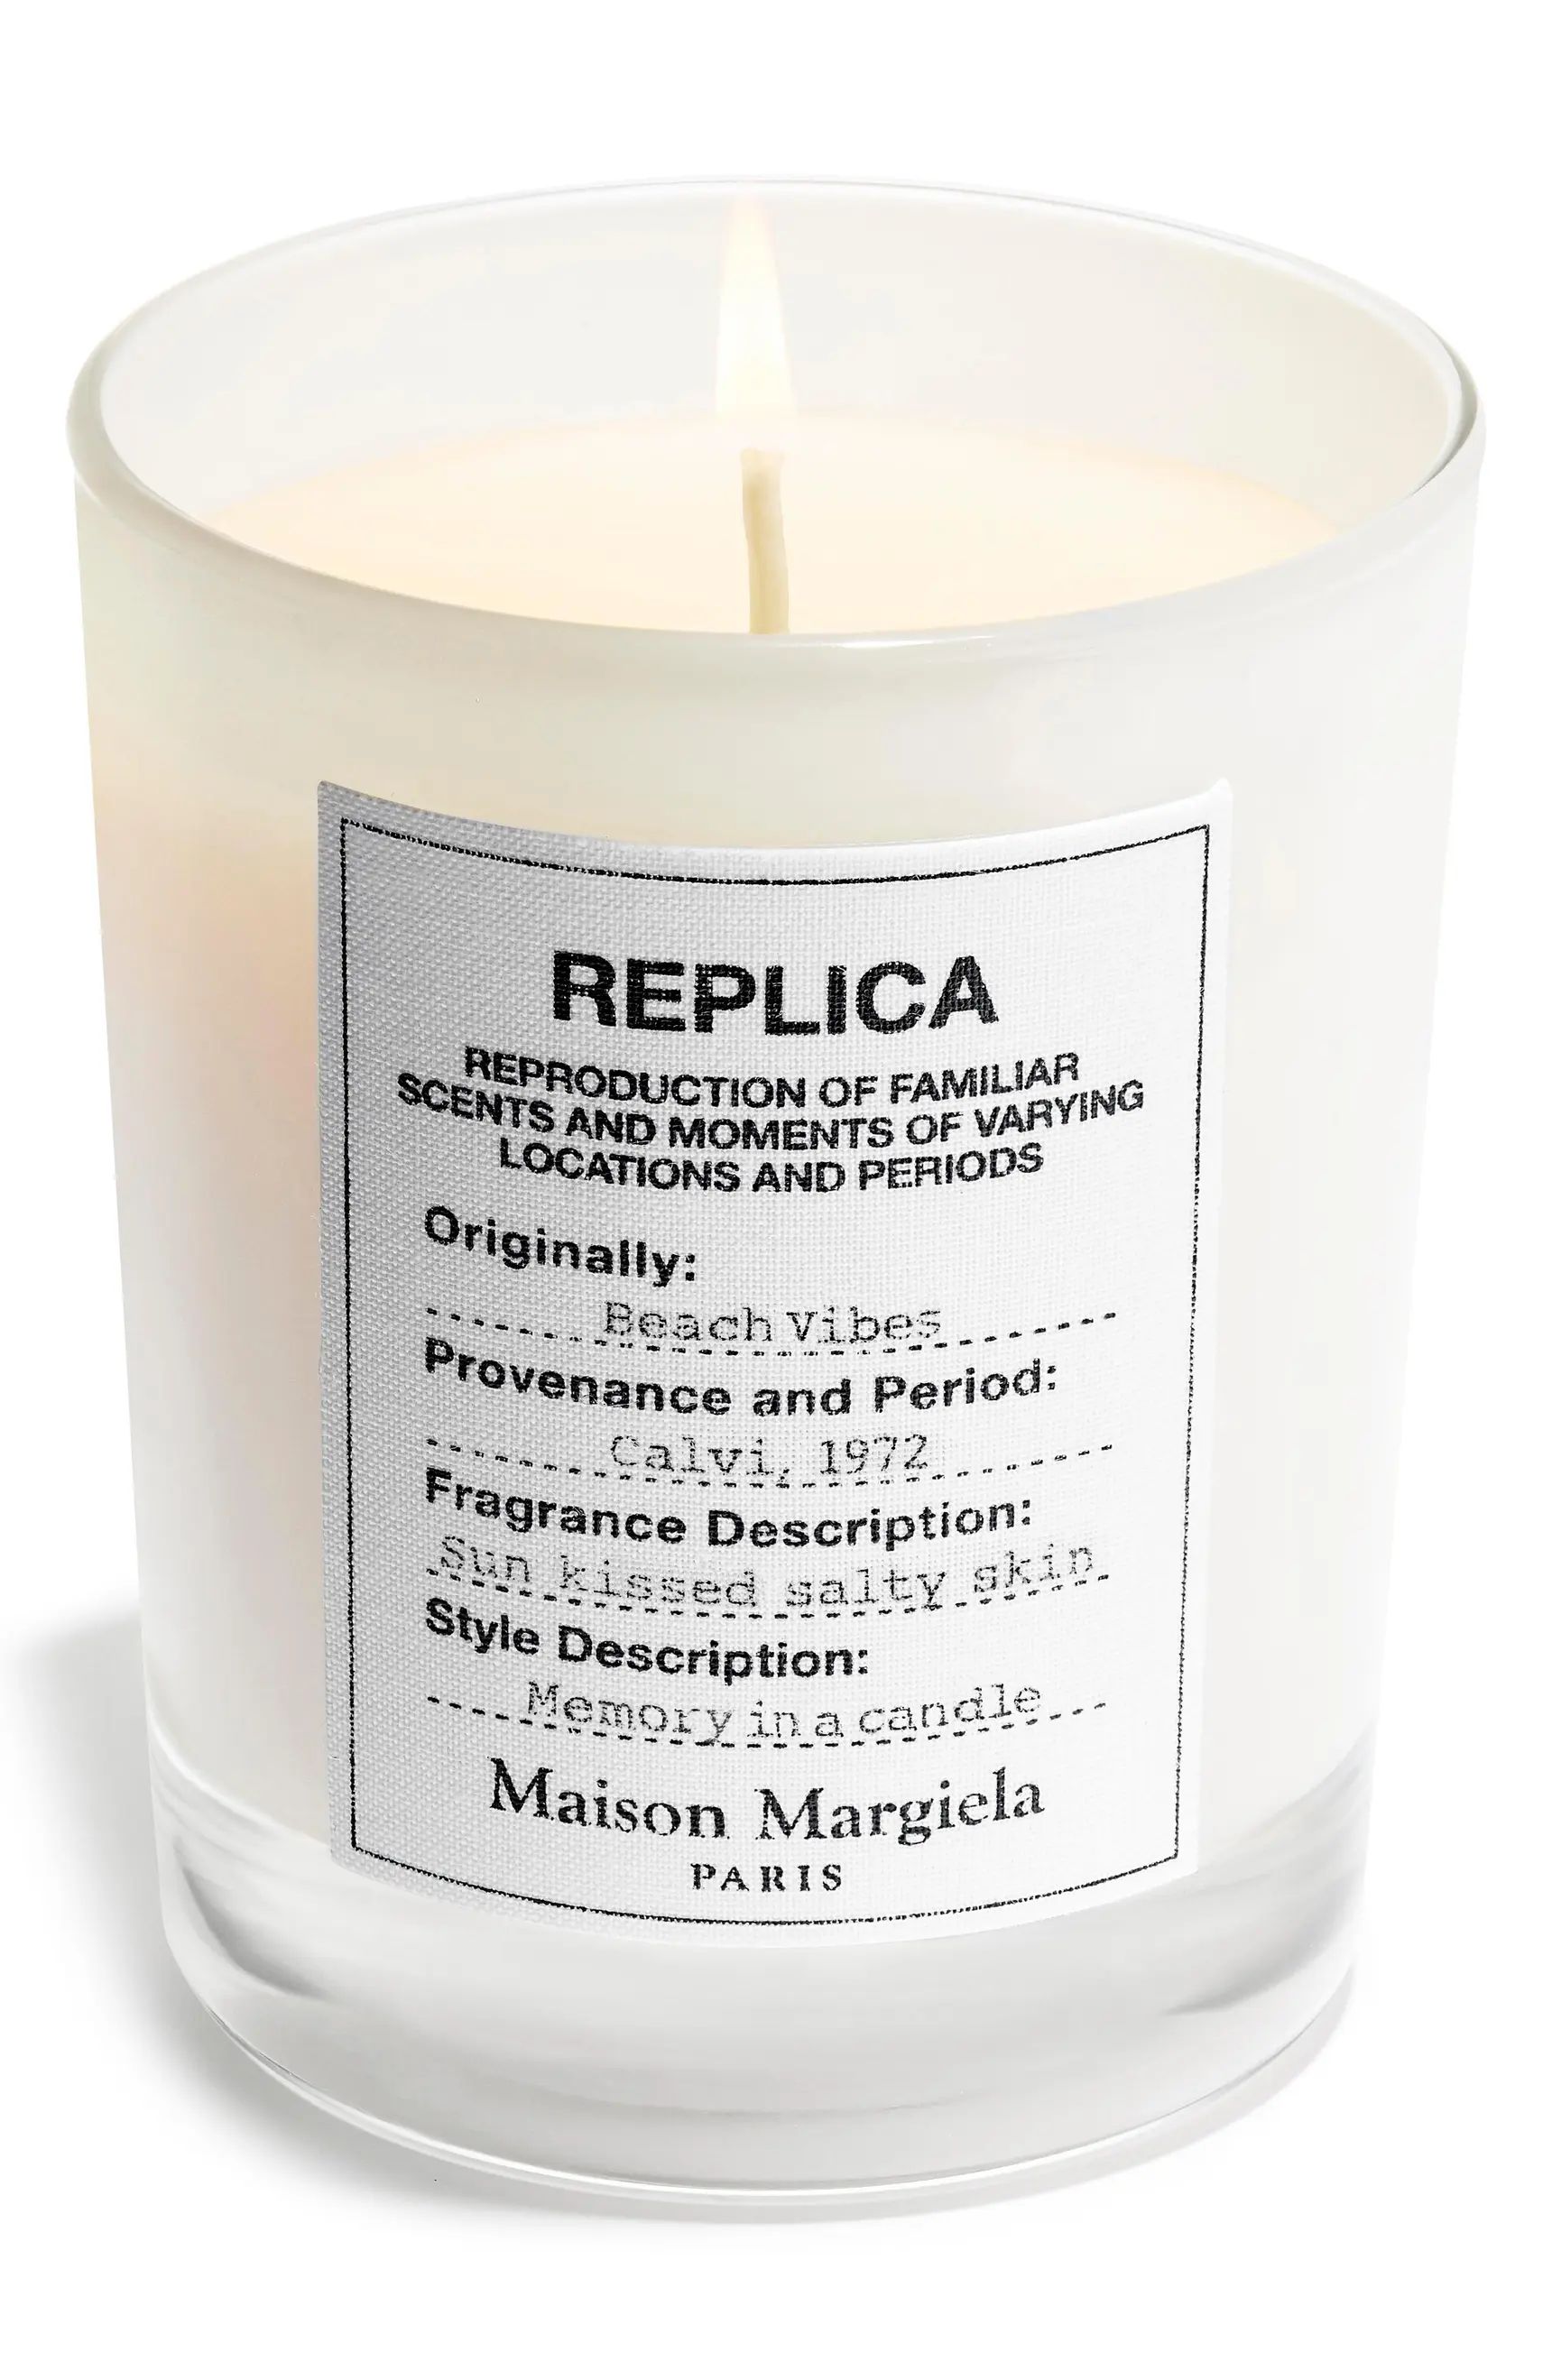 Replica Beach Vibes Scented Candle | Nordstrom